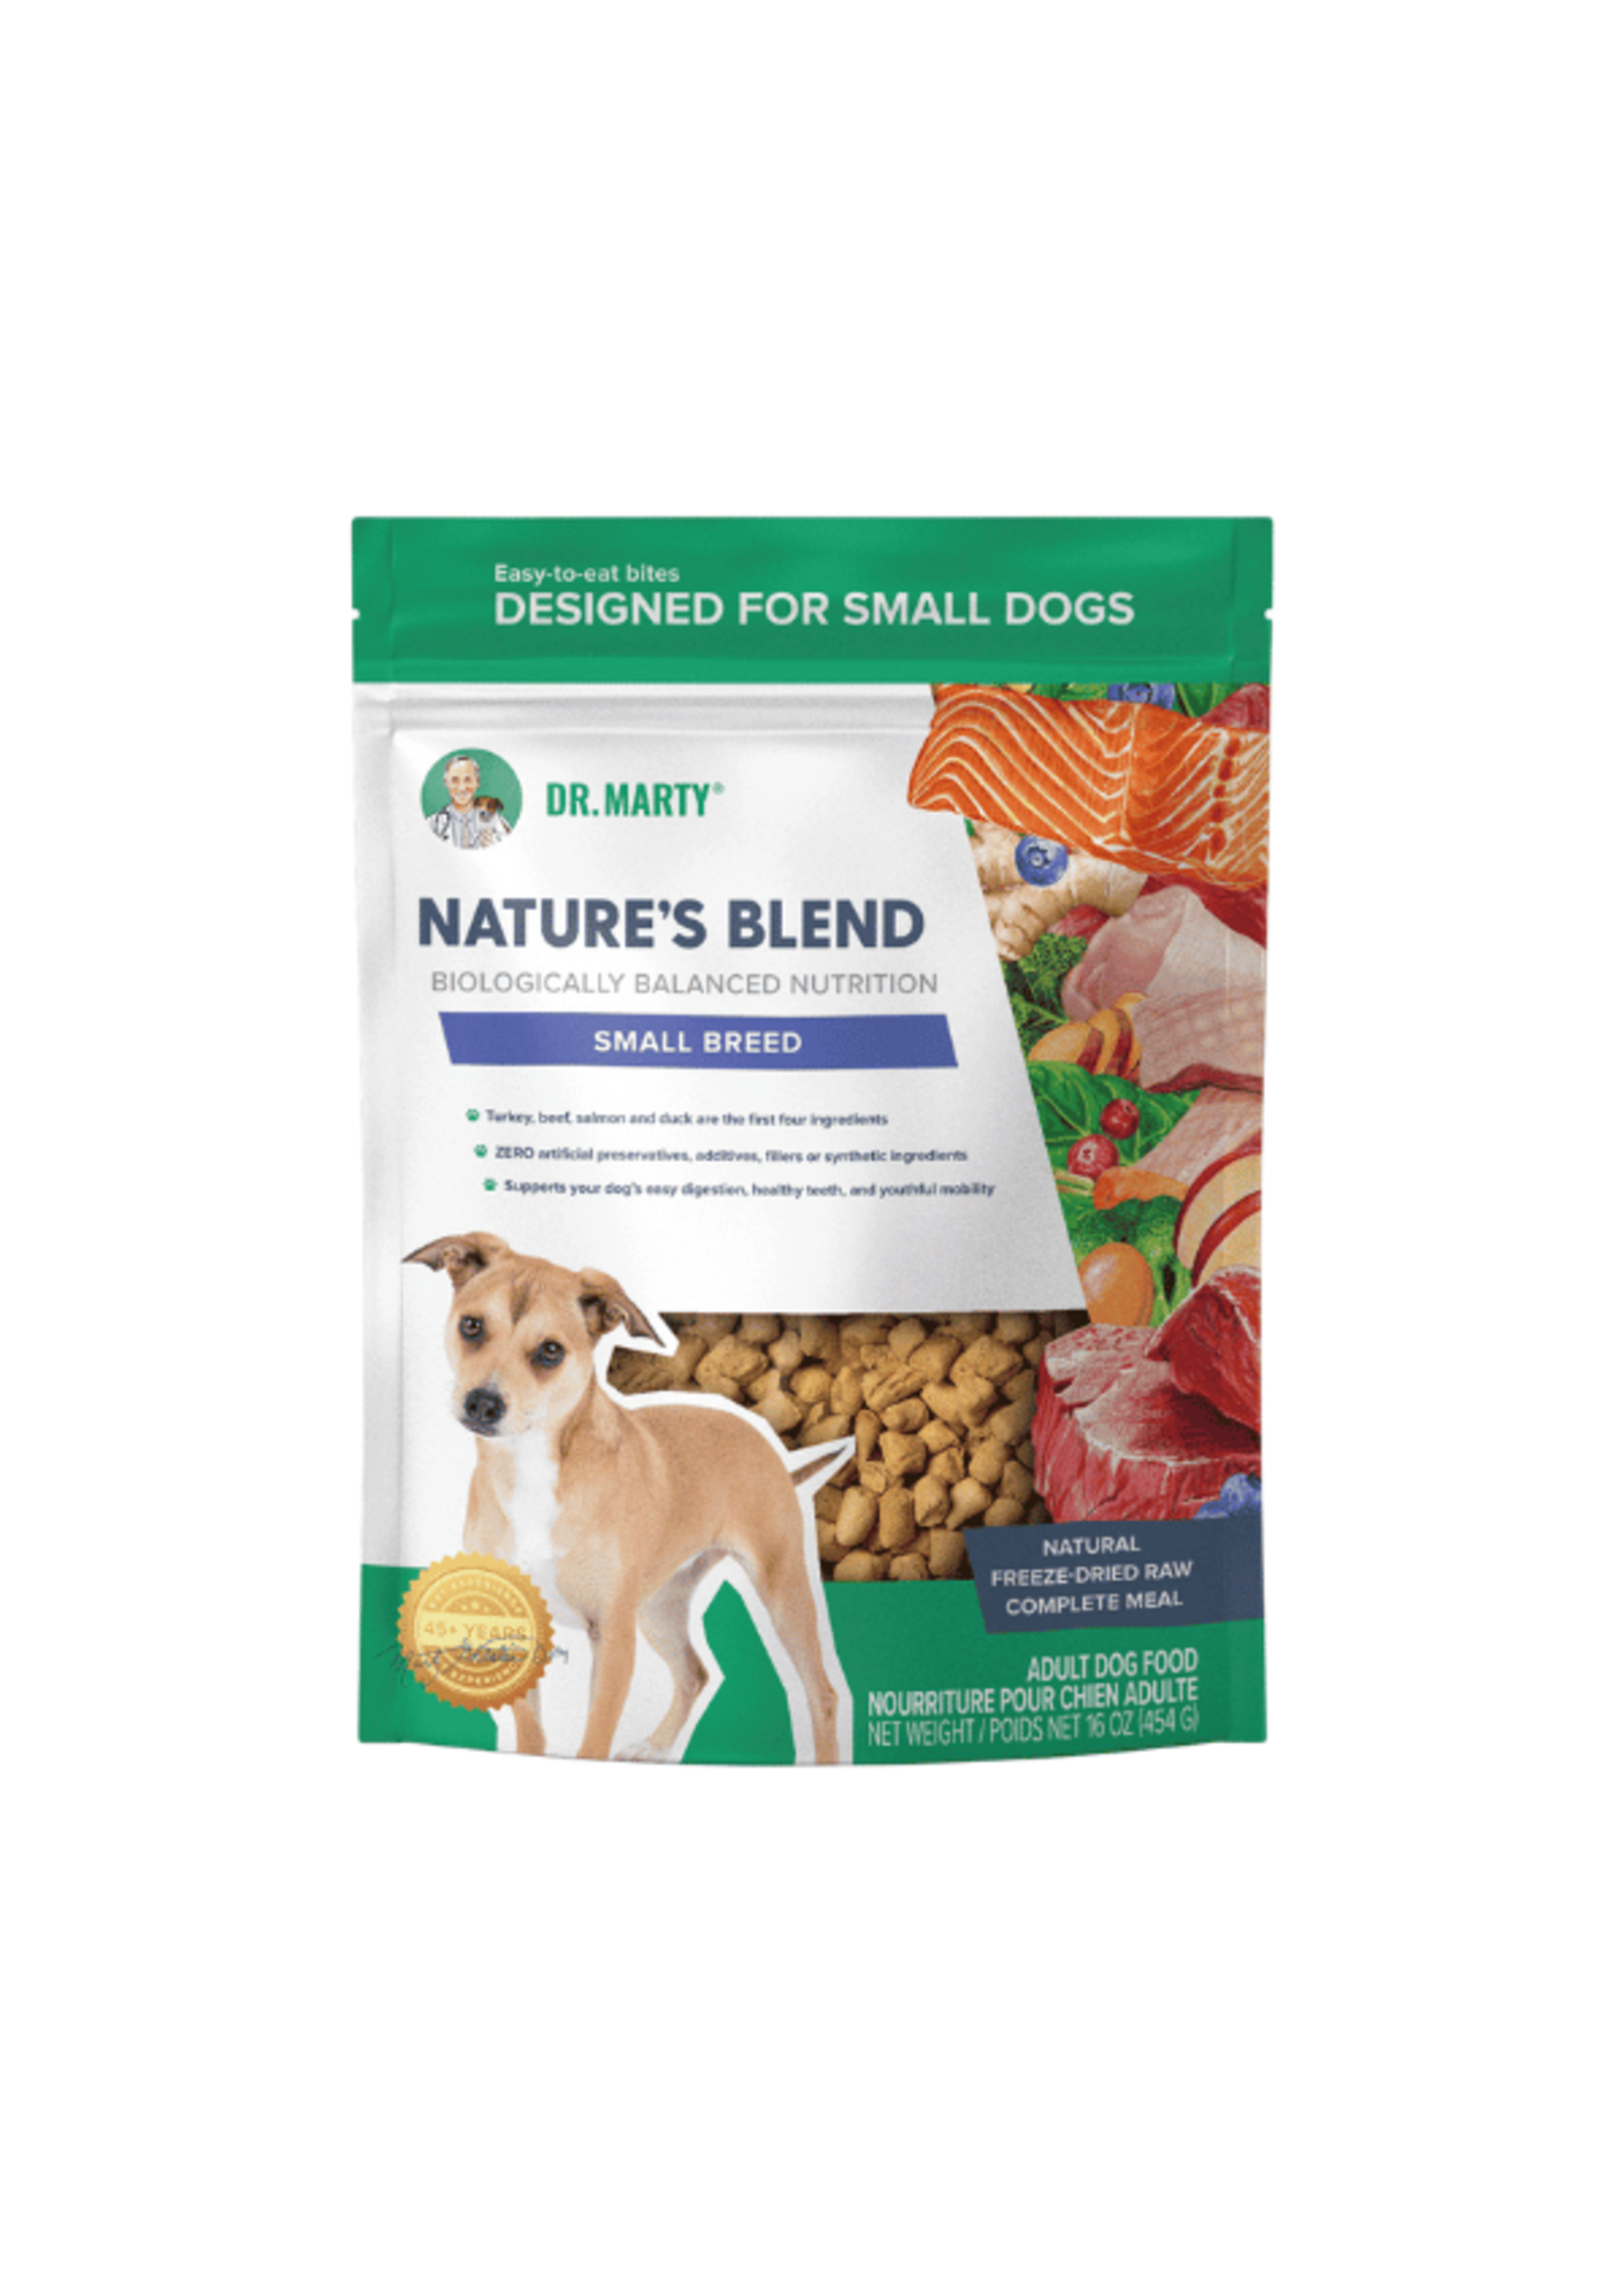 Dr. Marty Dr. Marty Nature's Blend Freeze-Dried Raw